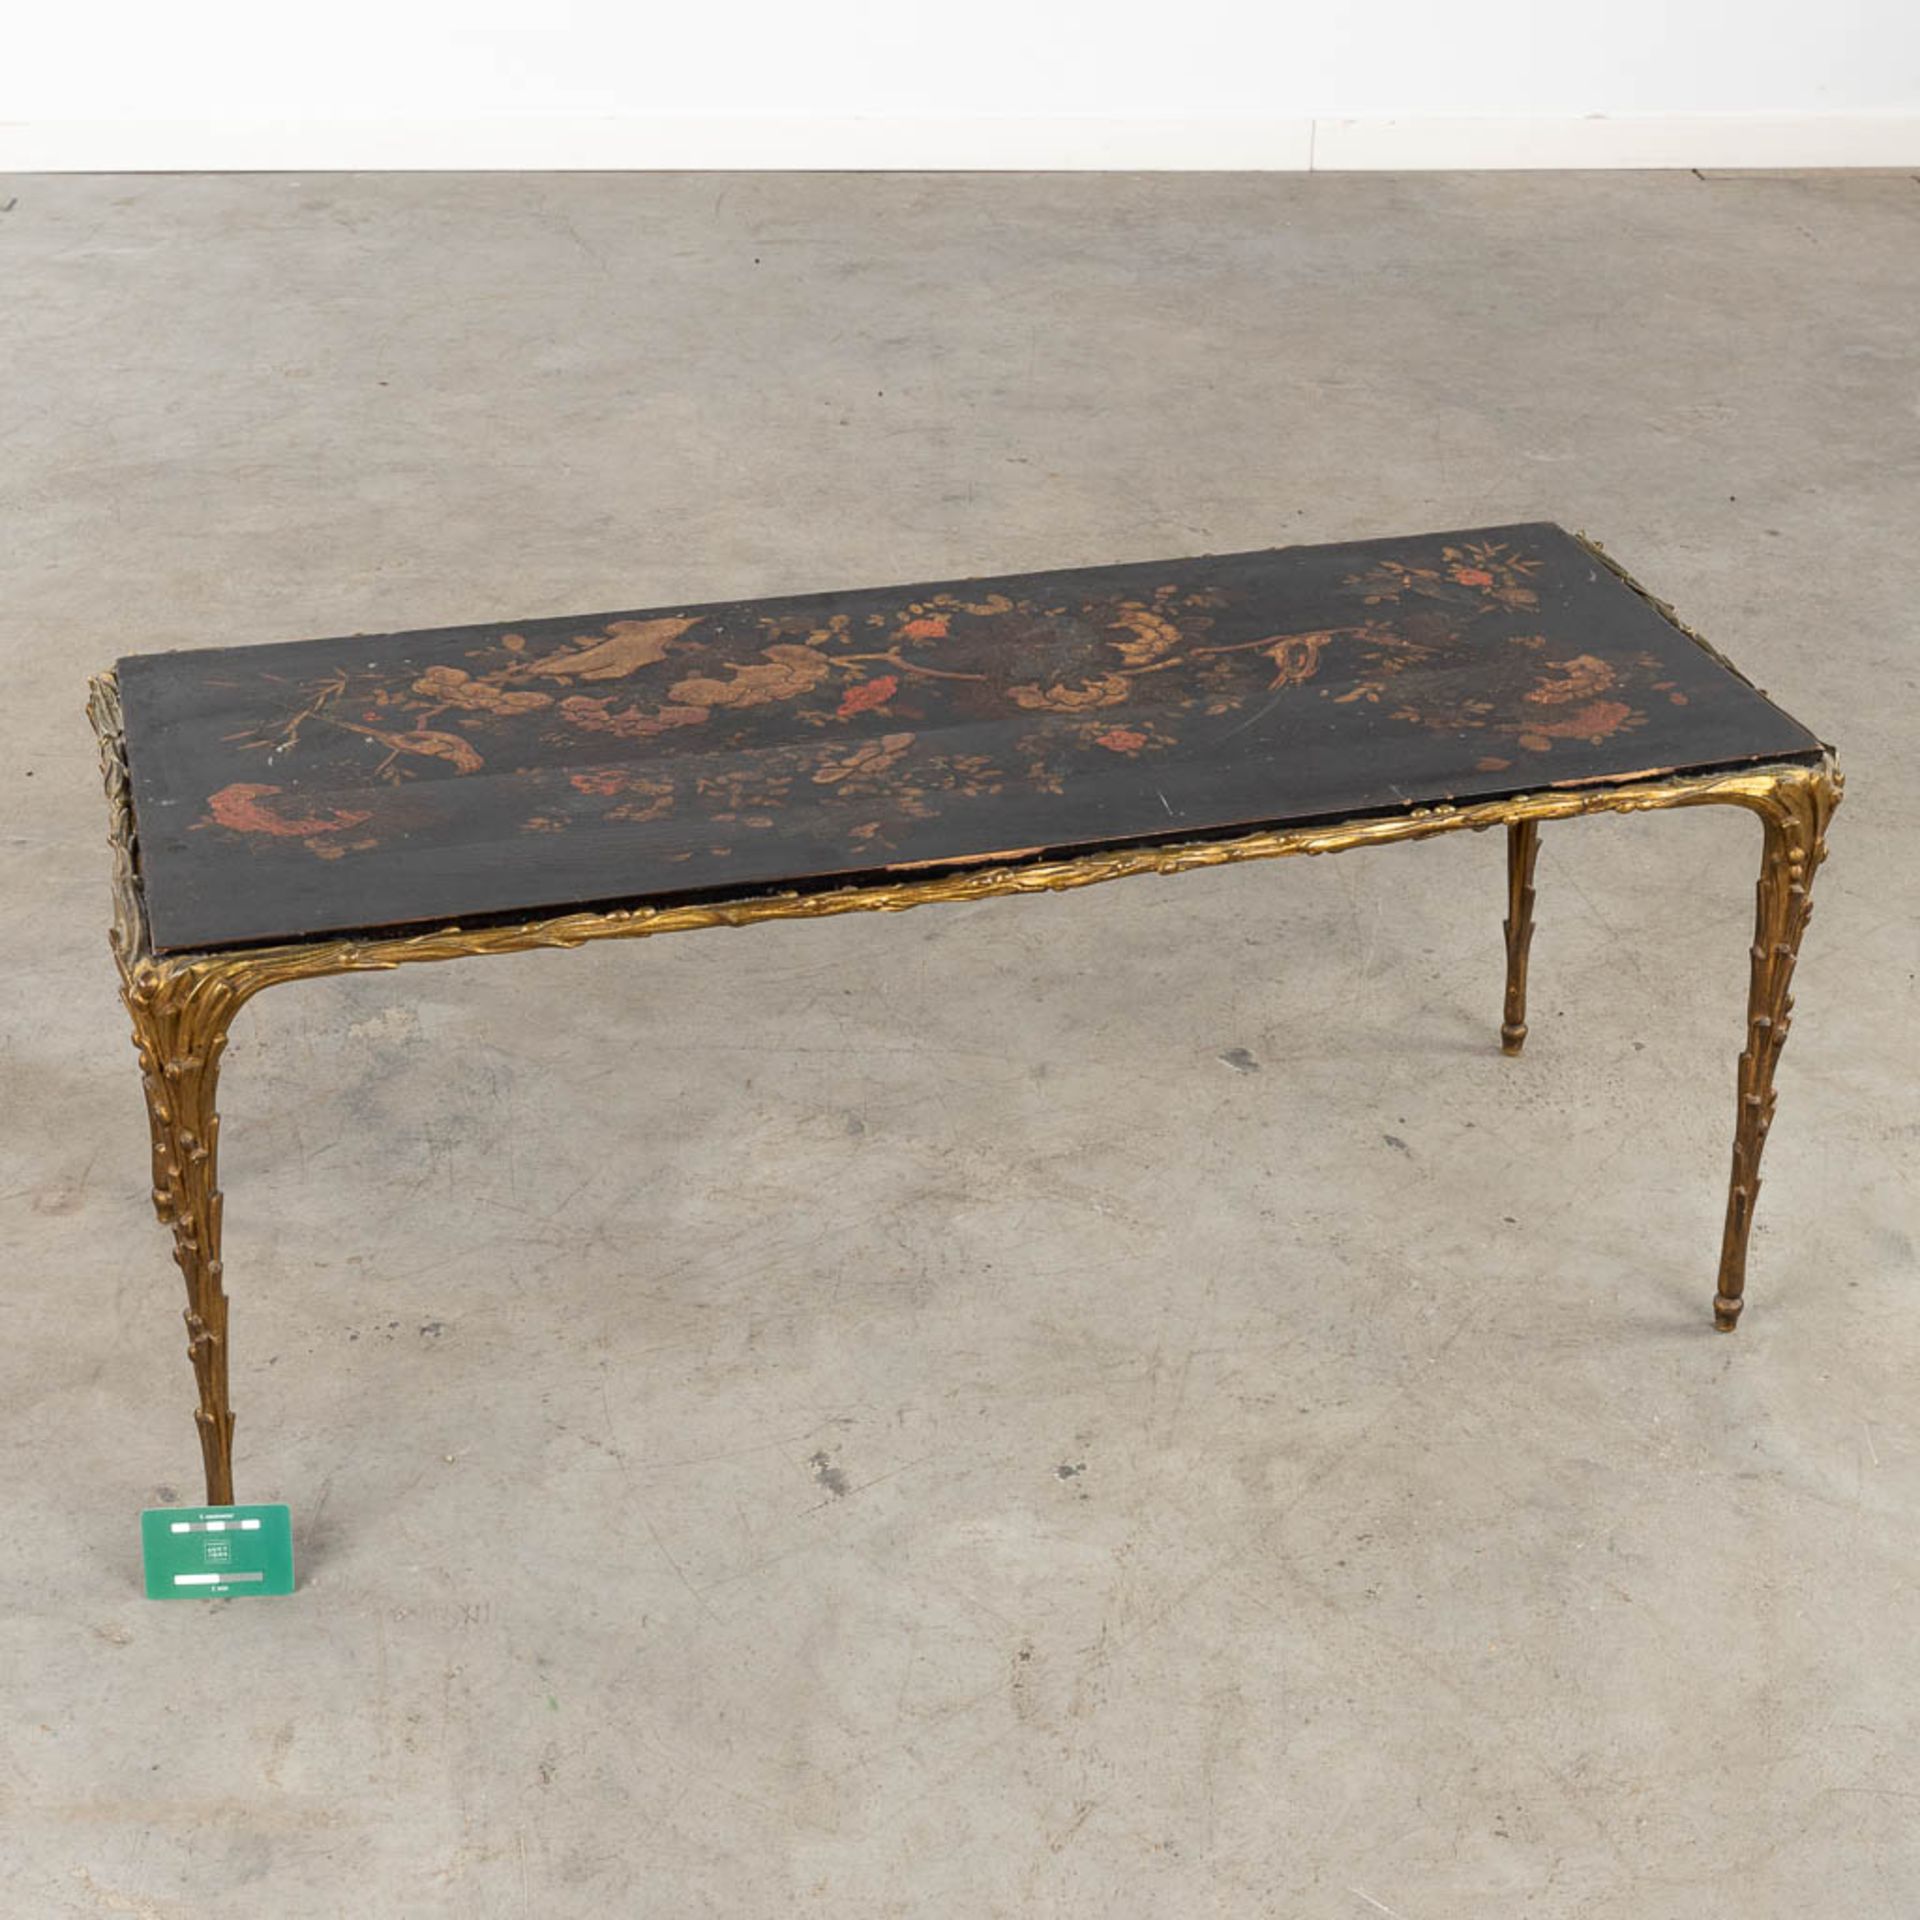 Maison Bagues 'Mid-Century Coffee Table' with lacquered Chinoiserie decor. (D:43 x W:100 x H:42 cm) - Image 2 of 20